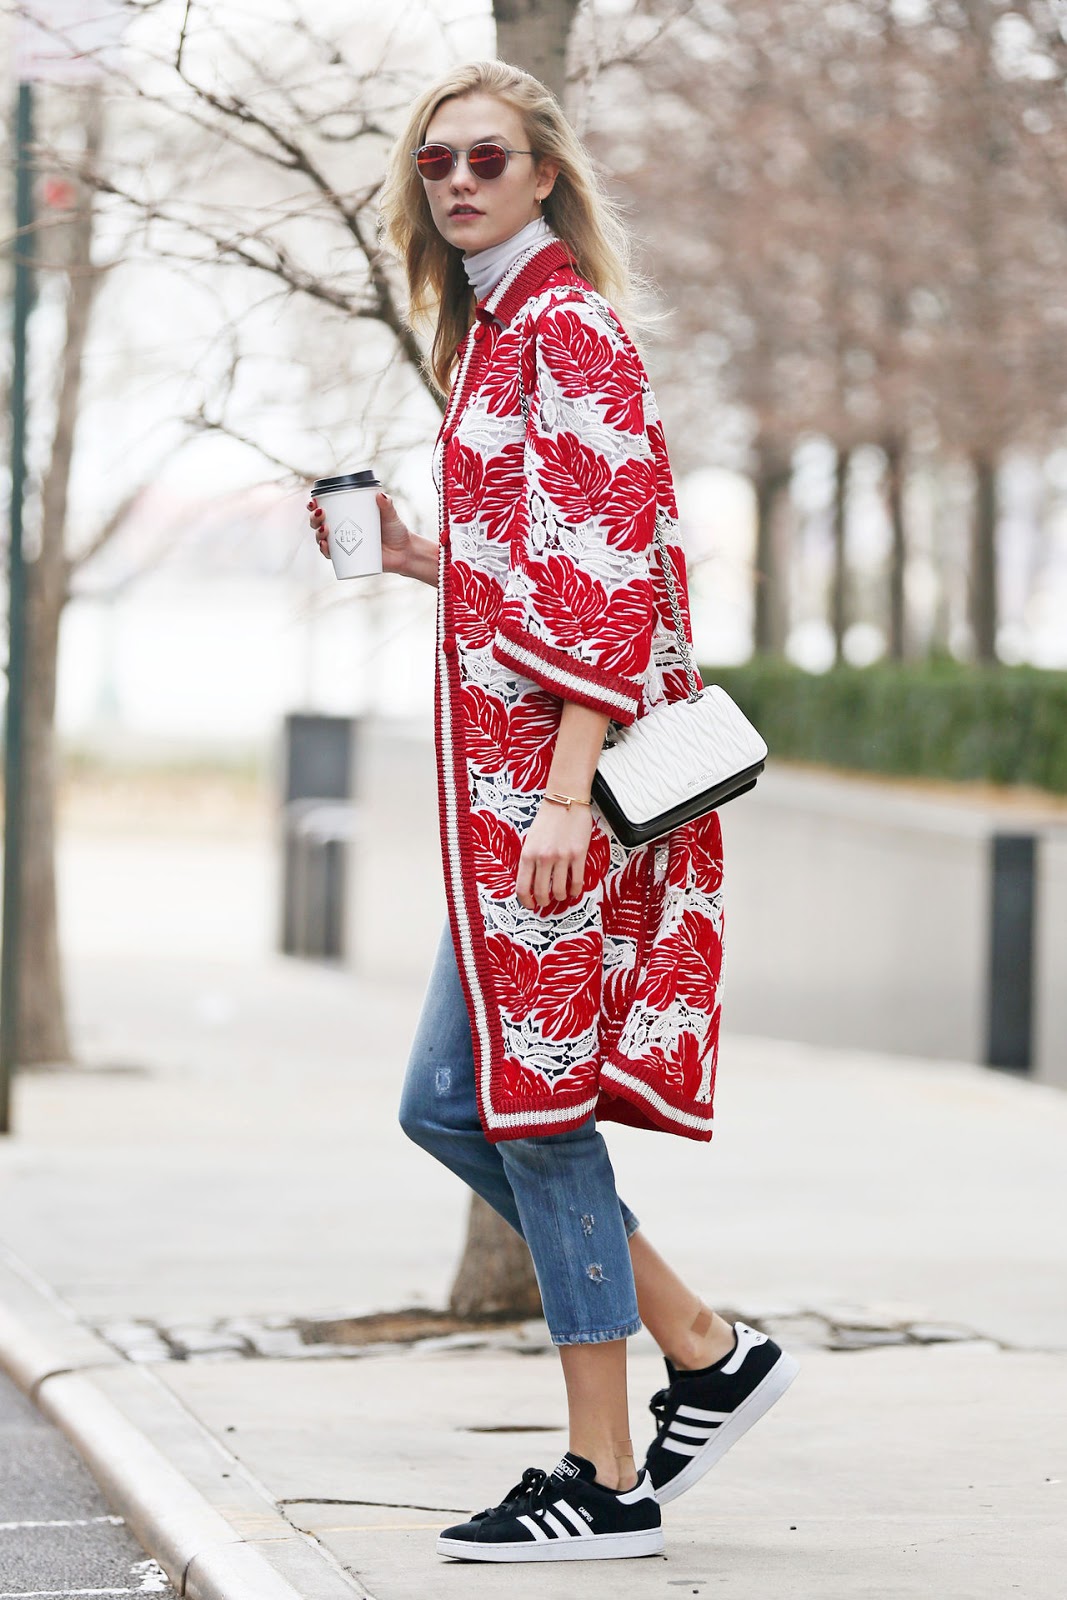 Karlie Kloss Wears a Statement Coat in NYC - The Front Row View